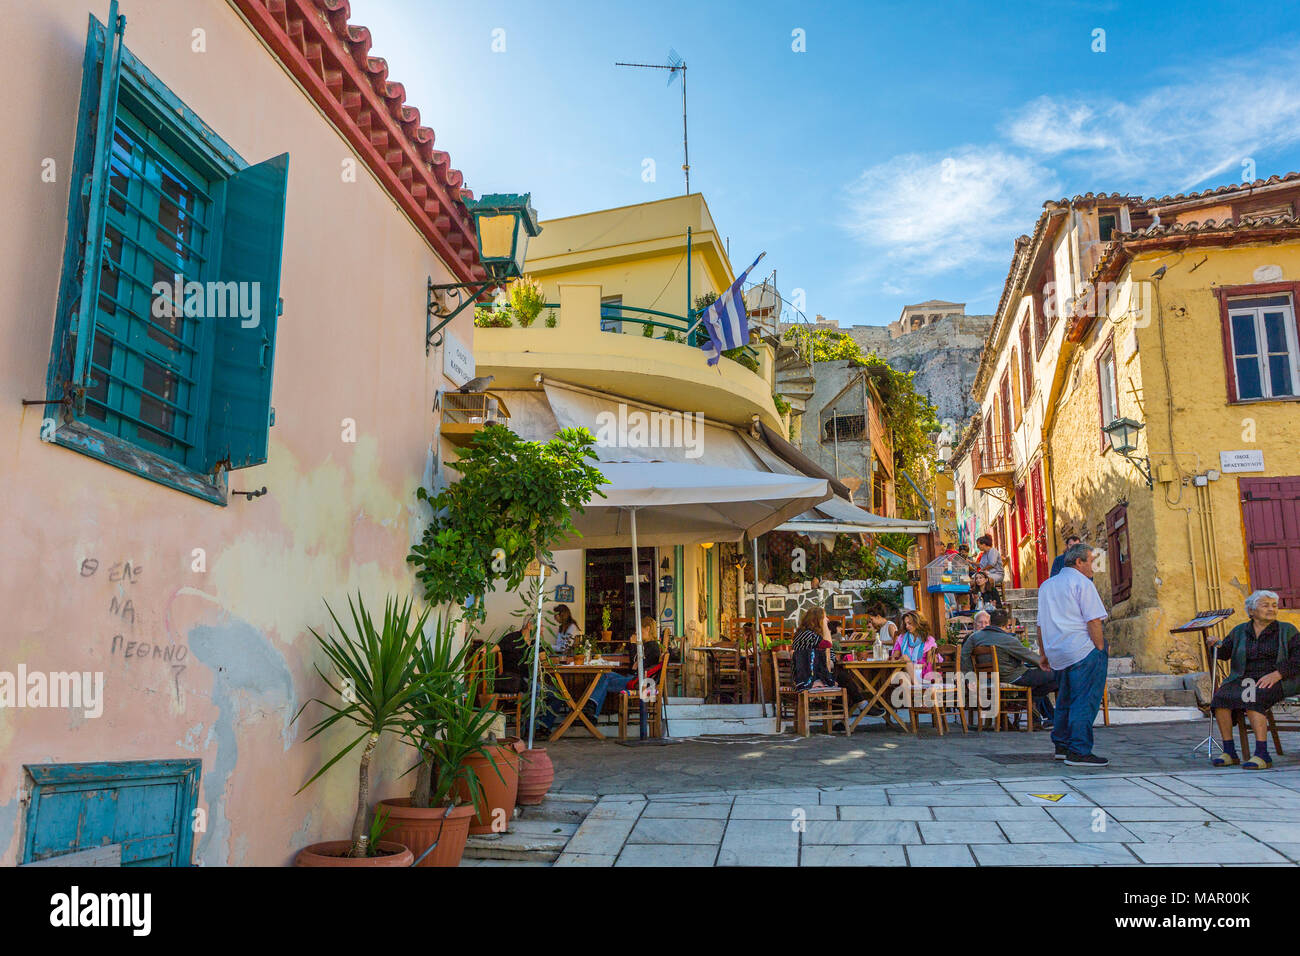 View of pastel coloured houses and cafe in Plaka District of Athens, overlooked by the Acropolis, Athens, Greece, Europe Stock Photo